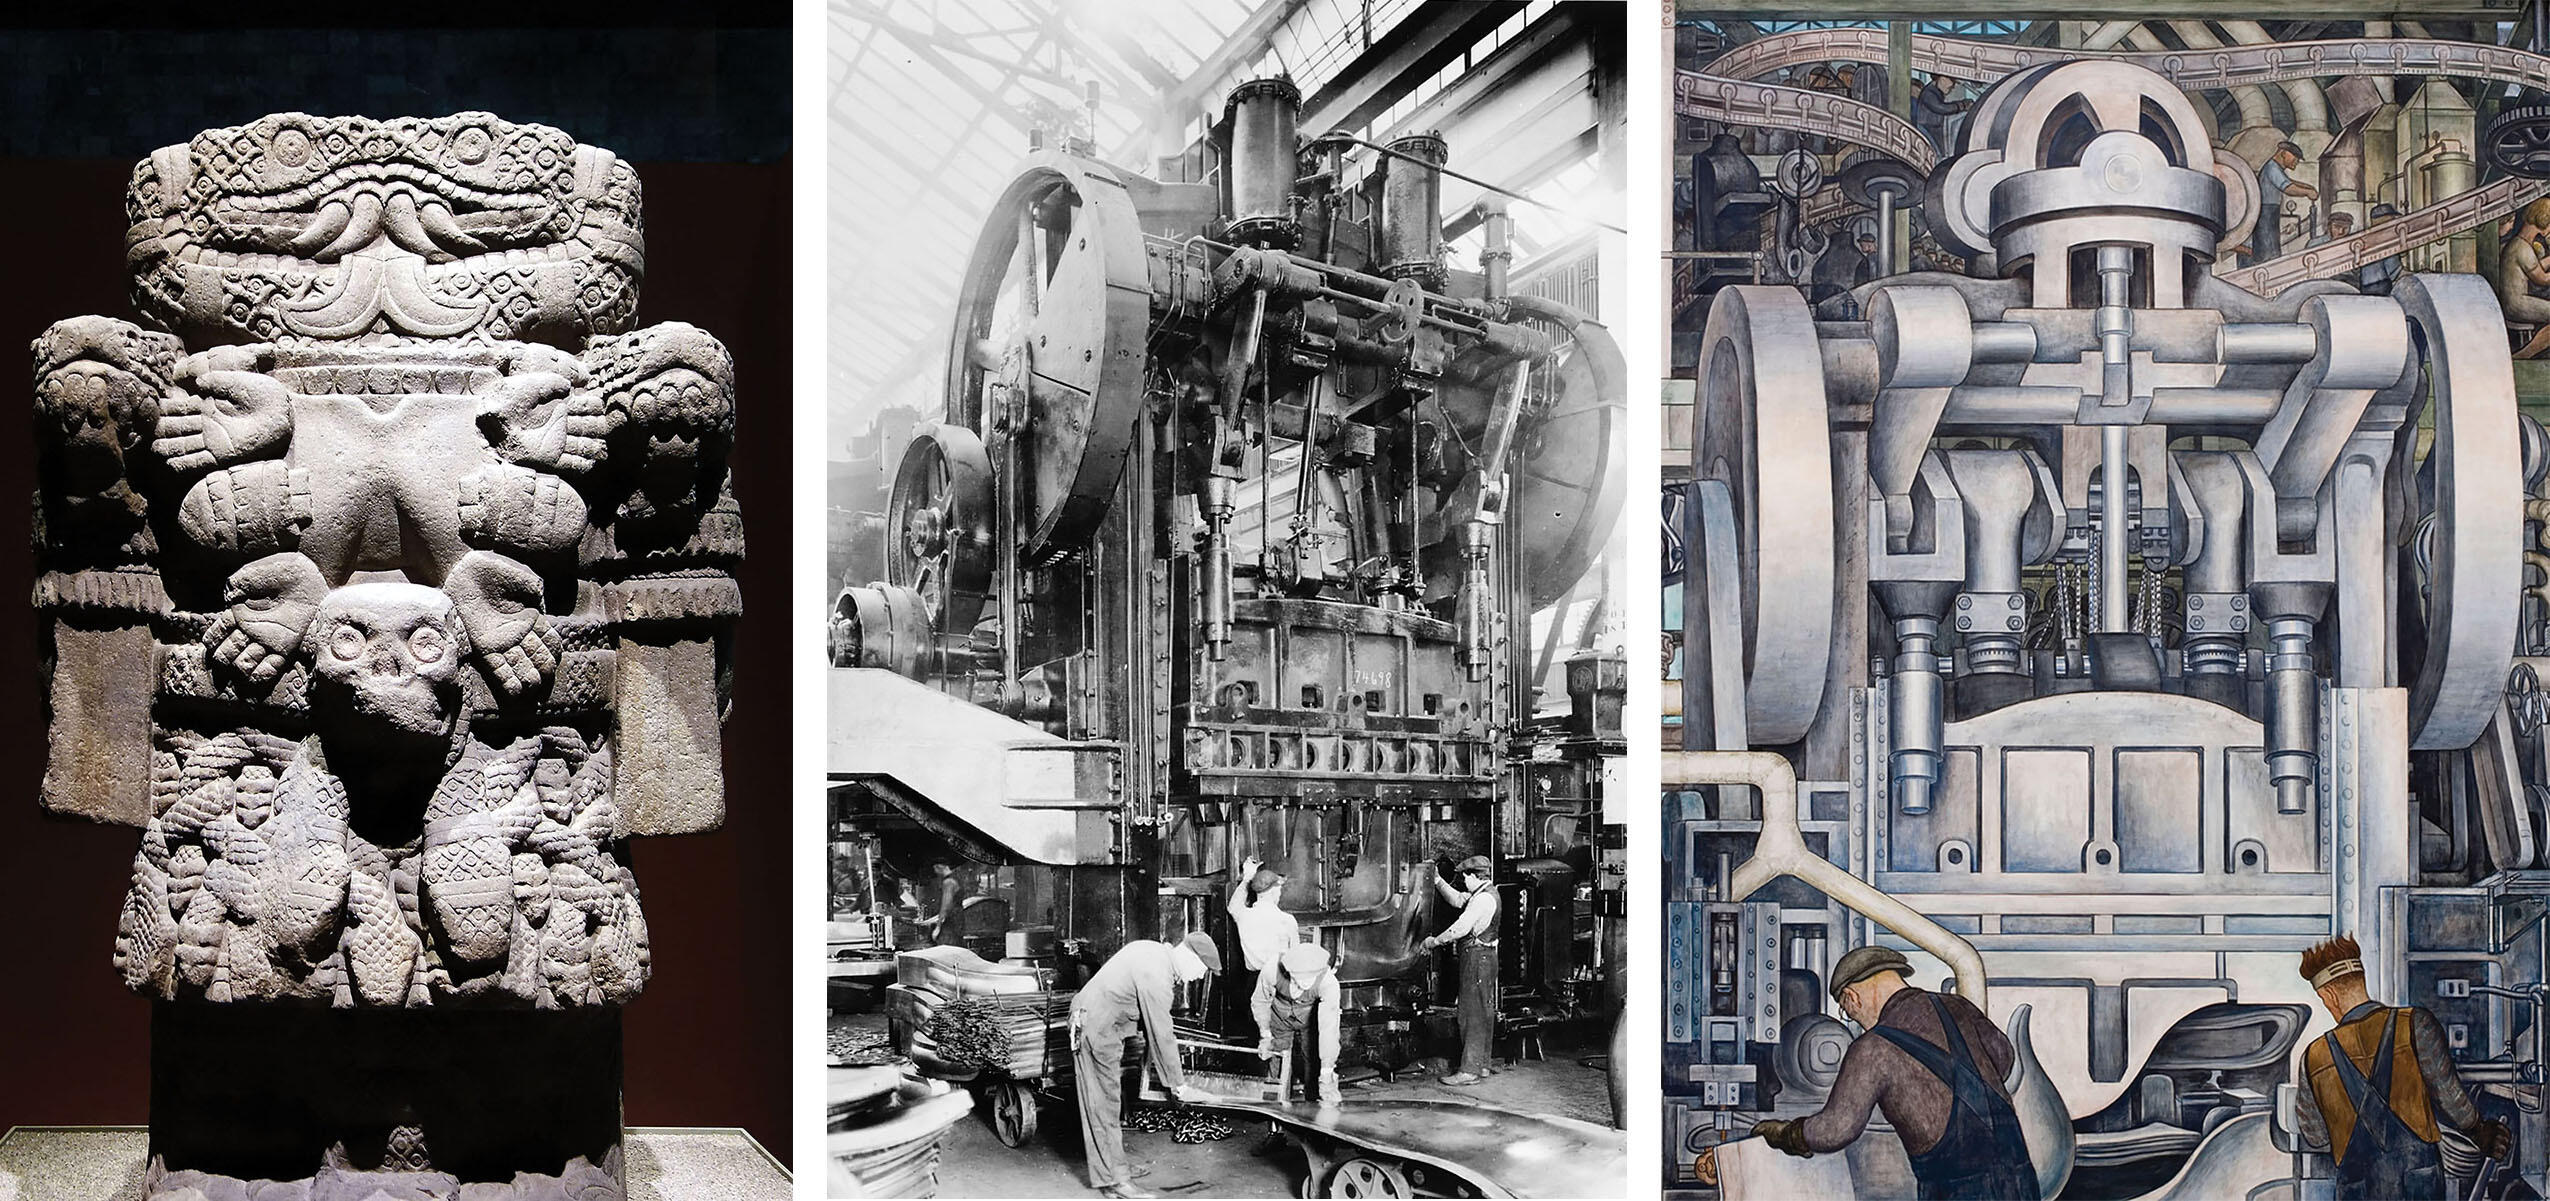 A statue of Coatlicue, a metal stamping press at a car factory in 1915, and Rivera's fusion of the two in "Detroit Industry." (Photos by Steven Zucker and from the Library of Congress.)